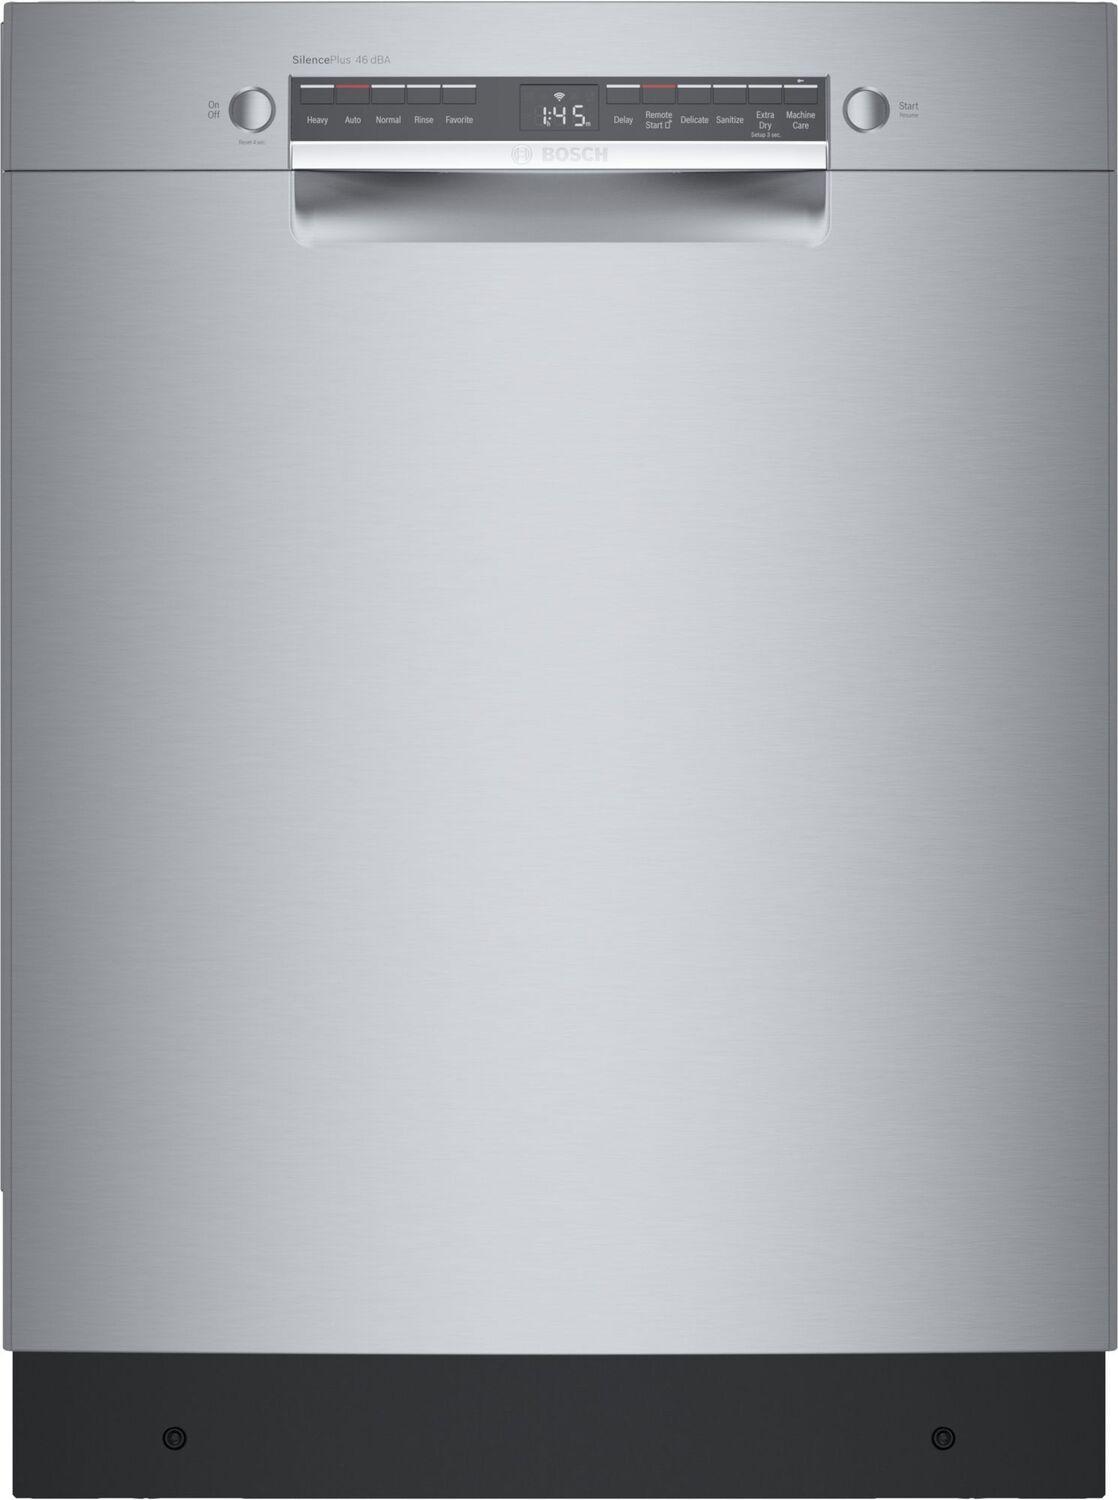 Bosch SGE53C55UC 300 Series Dishwasher 24" Stainless Steel Sge53C55Uc